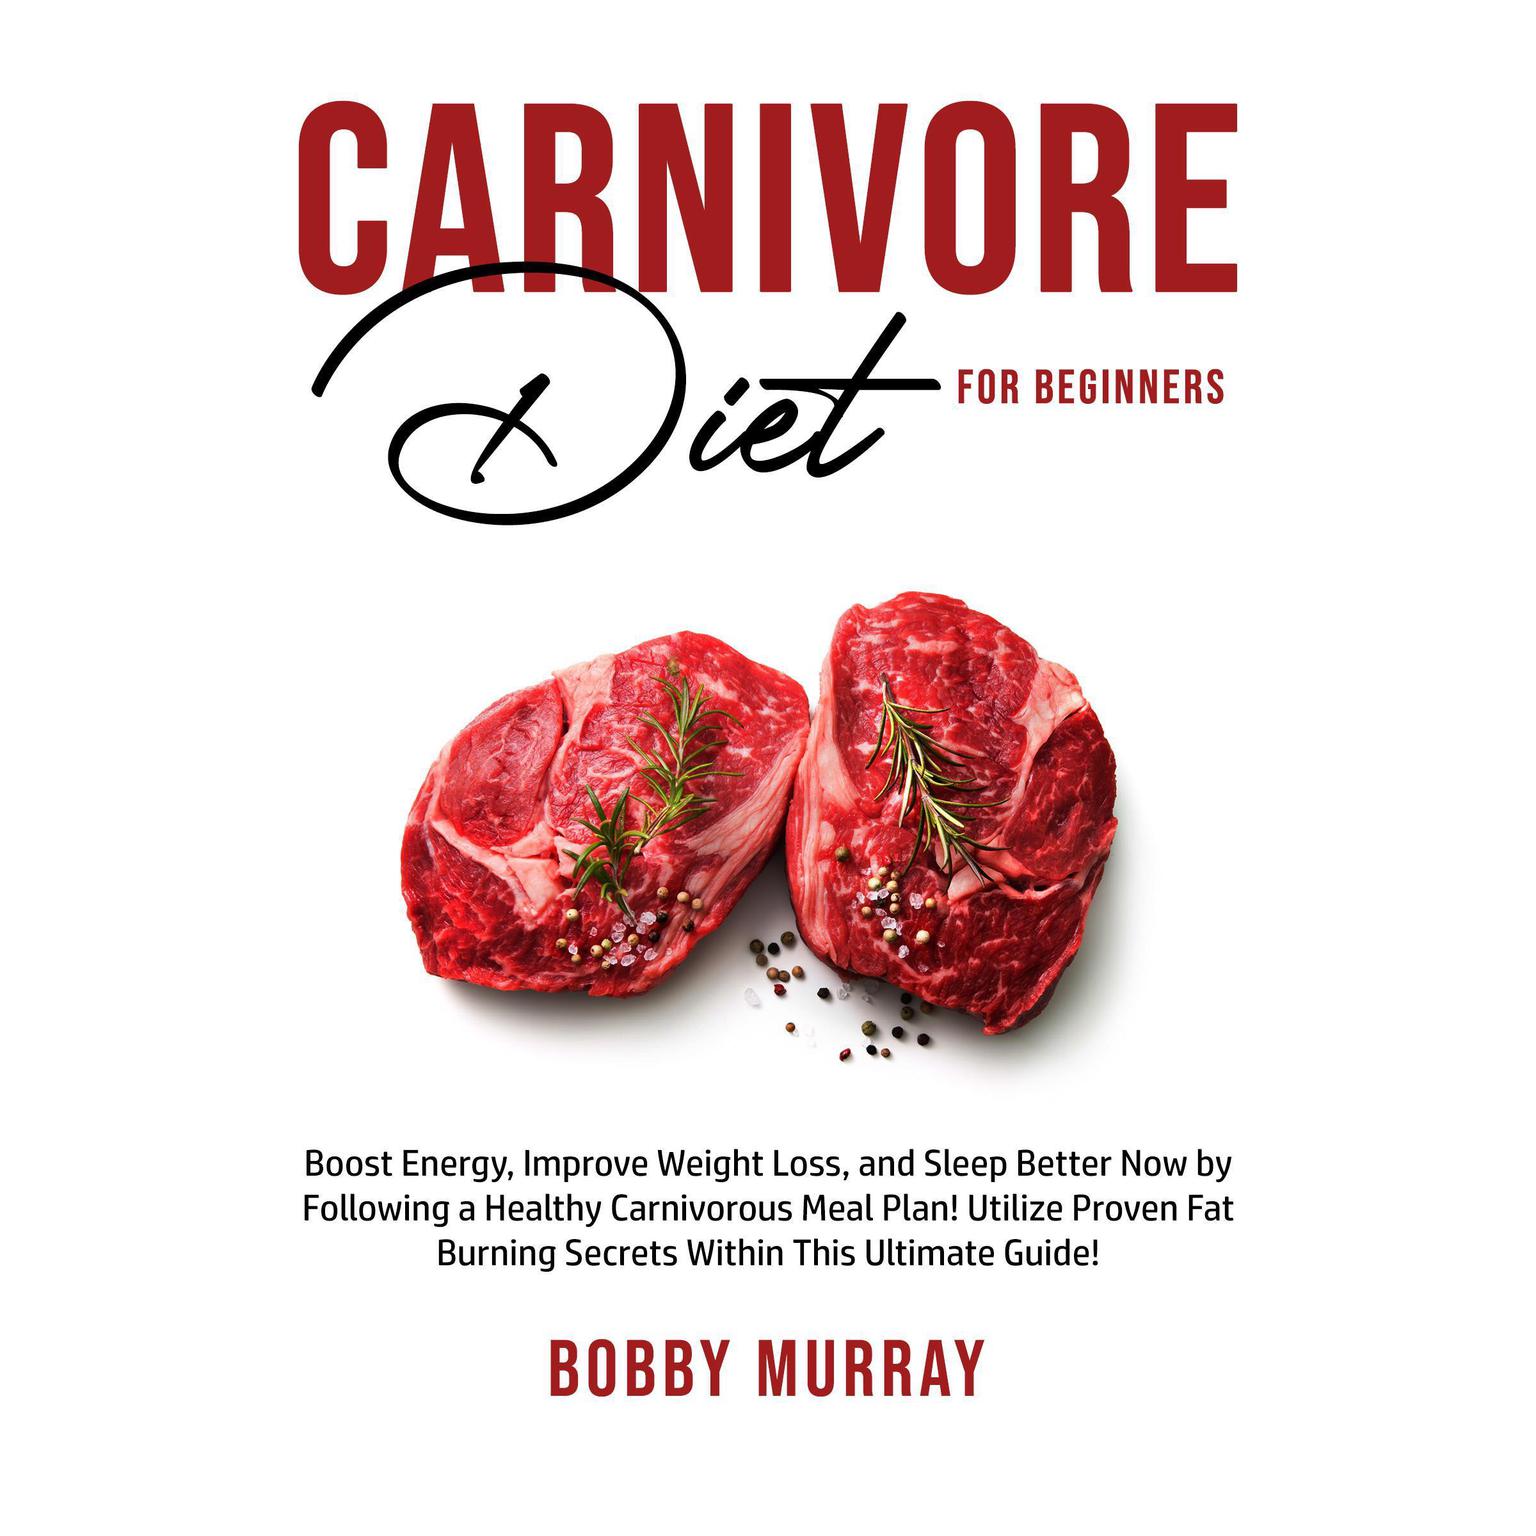 Carnivore Diet for Beginners: Boost Energy, Improve Weight Loss, and Sleep Better Now by Following a Healthy Carnivorous Meal Plan! Utilize Proven Fat Burning Secrets Within This Ultimate Guide! Audiobook, by Bobby Murray